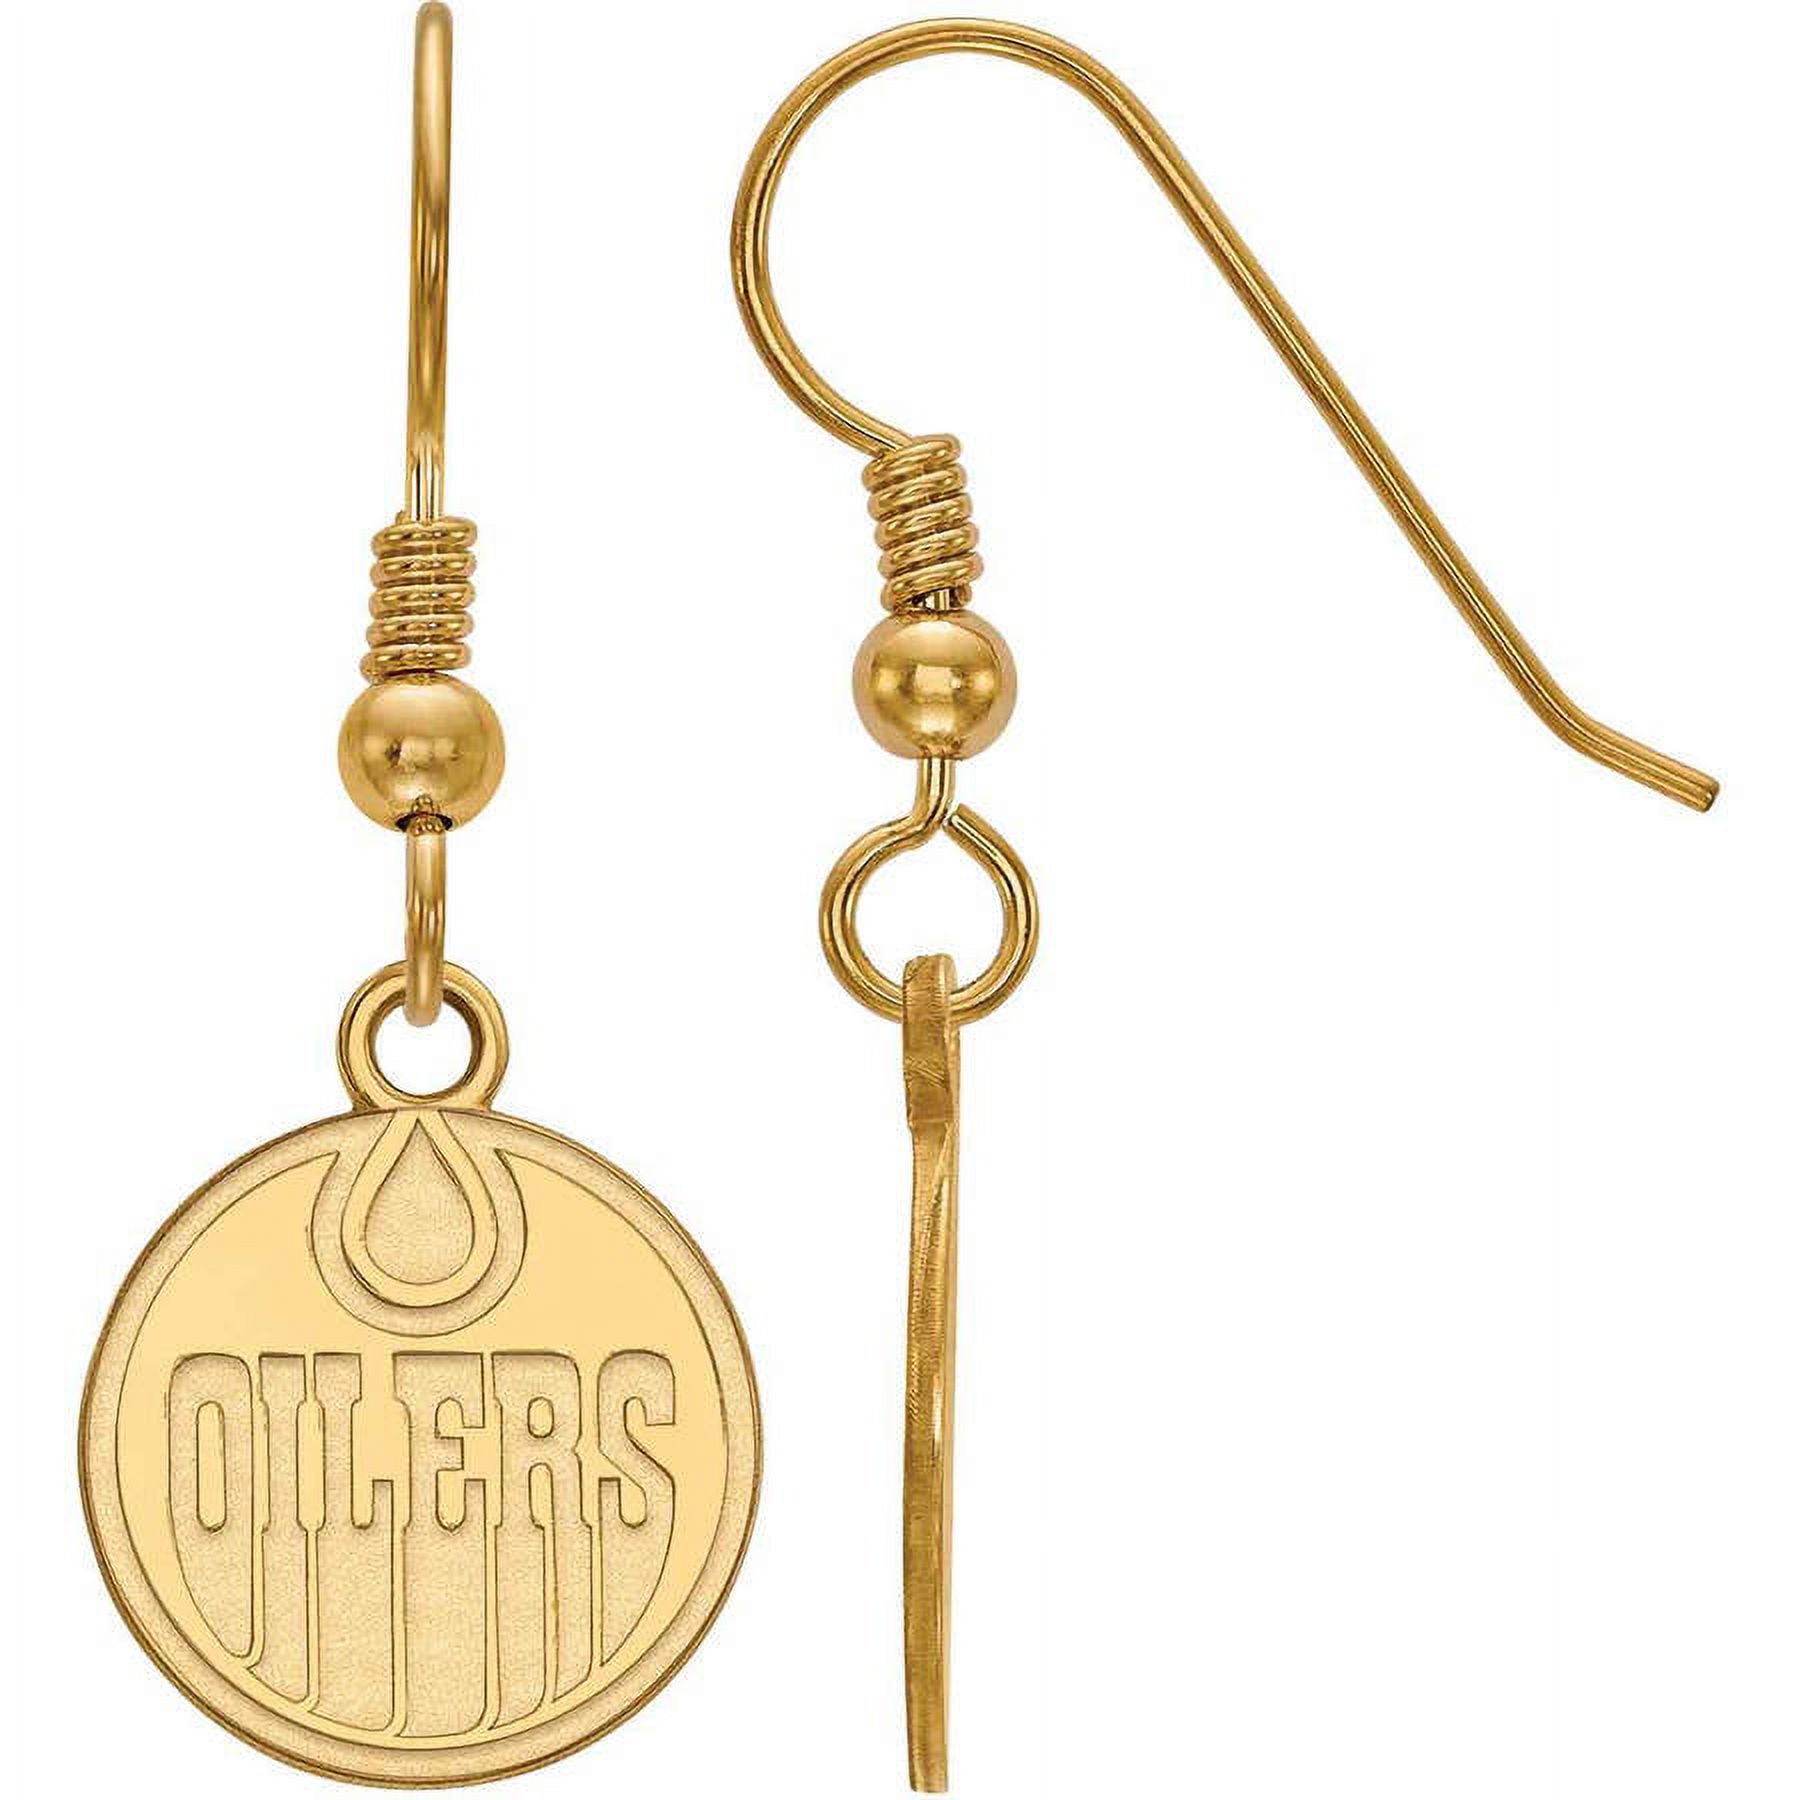 LogoArt Sterling Silver with 14 Karat Gold-plated NHL Edmonton Oilers Small Dangle Earrings - image 1 of 5